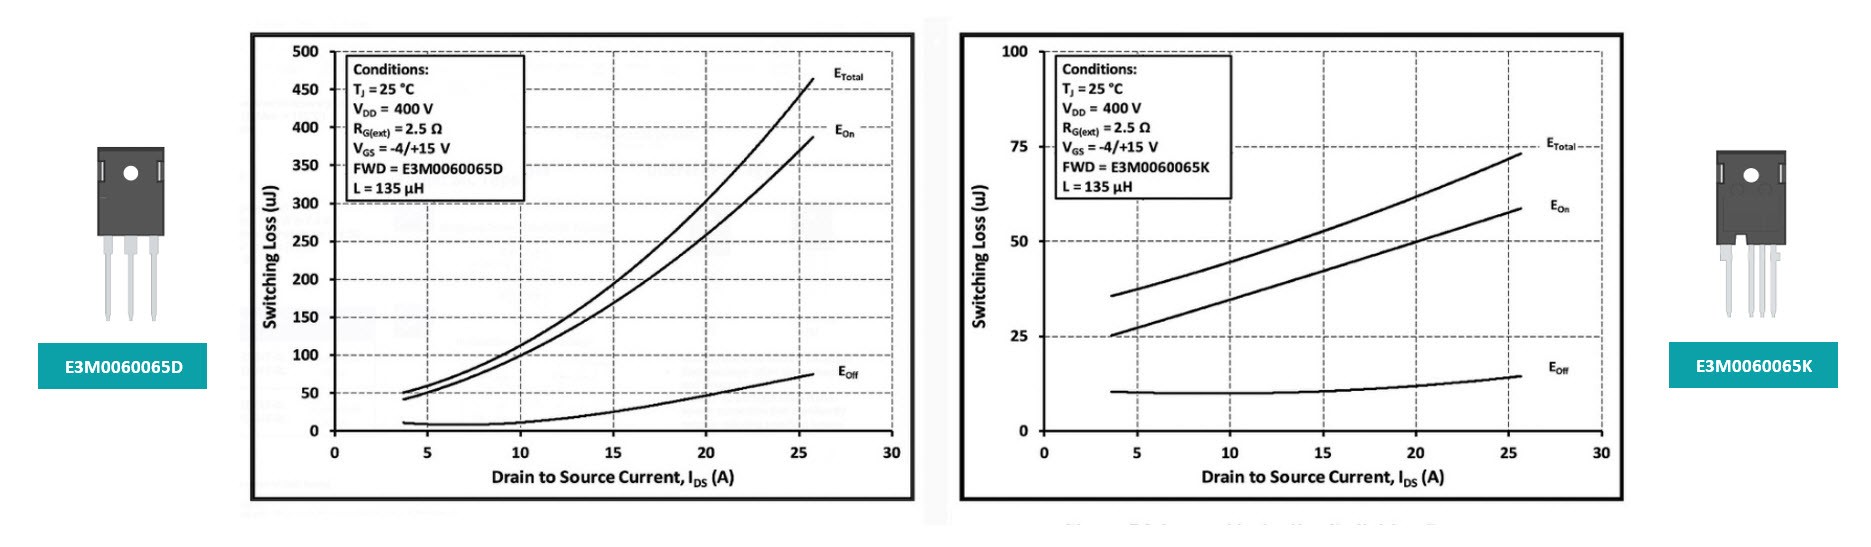 Two line graphs. The left graph is for the E3M0060065D, and the right is for the E3M0060065K. Both graphs show clamped inductive switching energy plotted against drain current. 